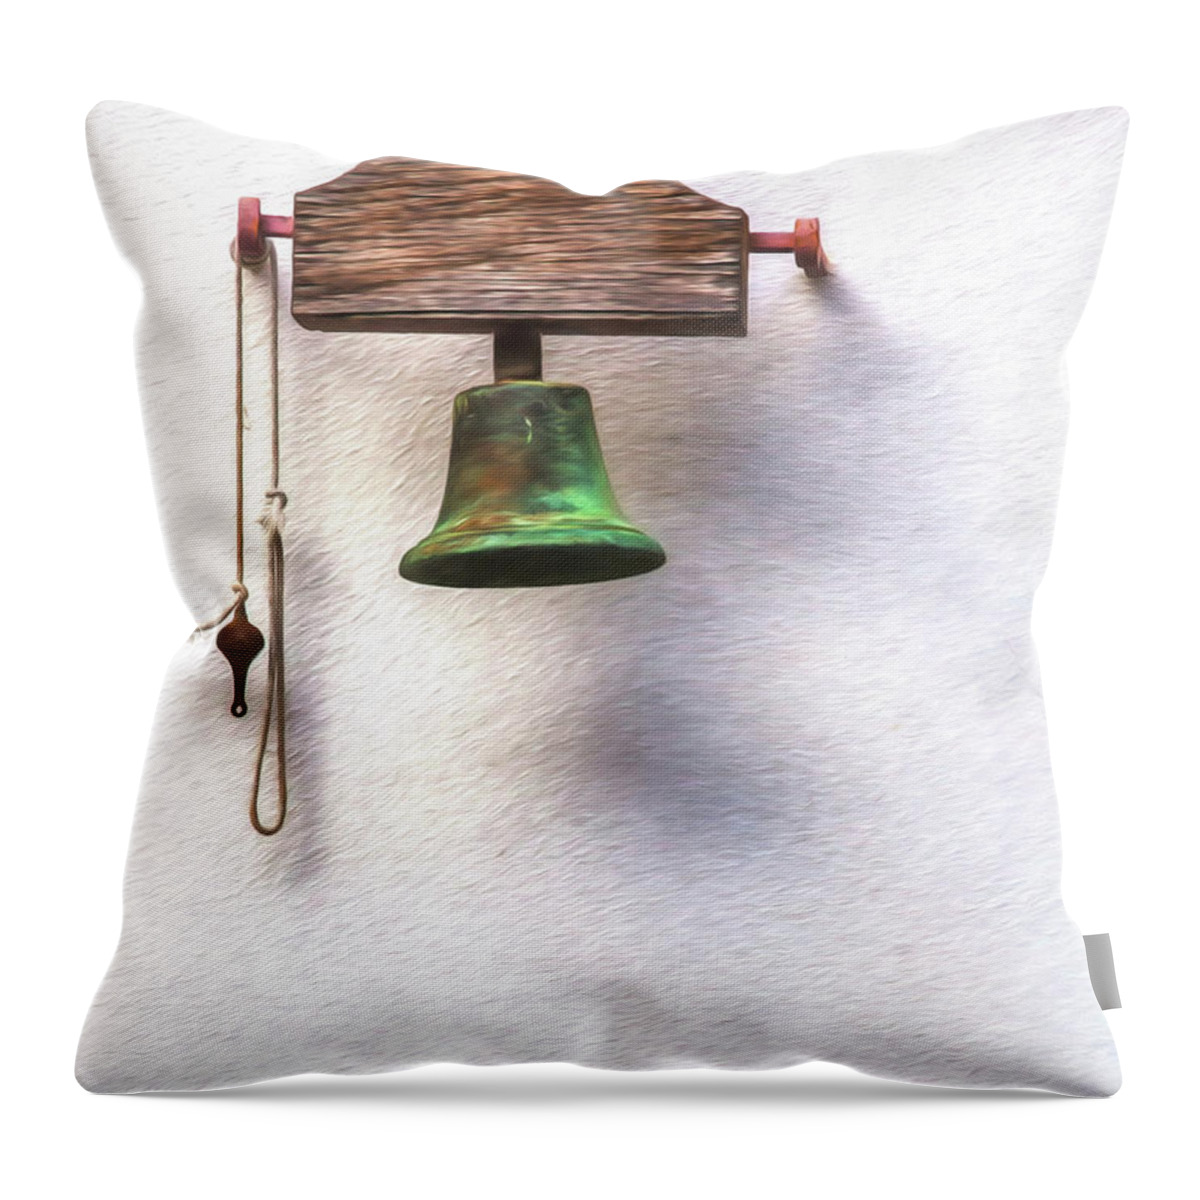 Church Throw Pillow featuring the photograph Medieval Church Bell by David Letts